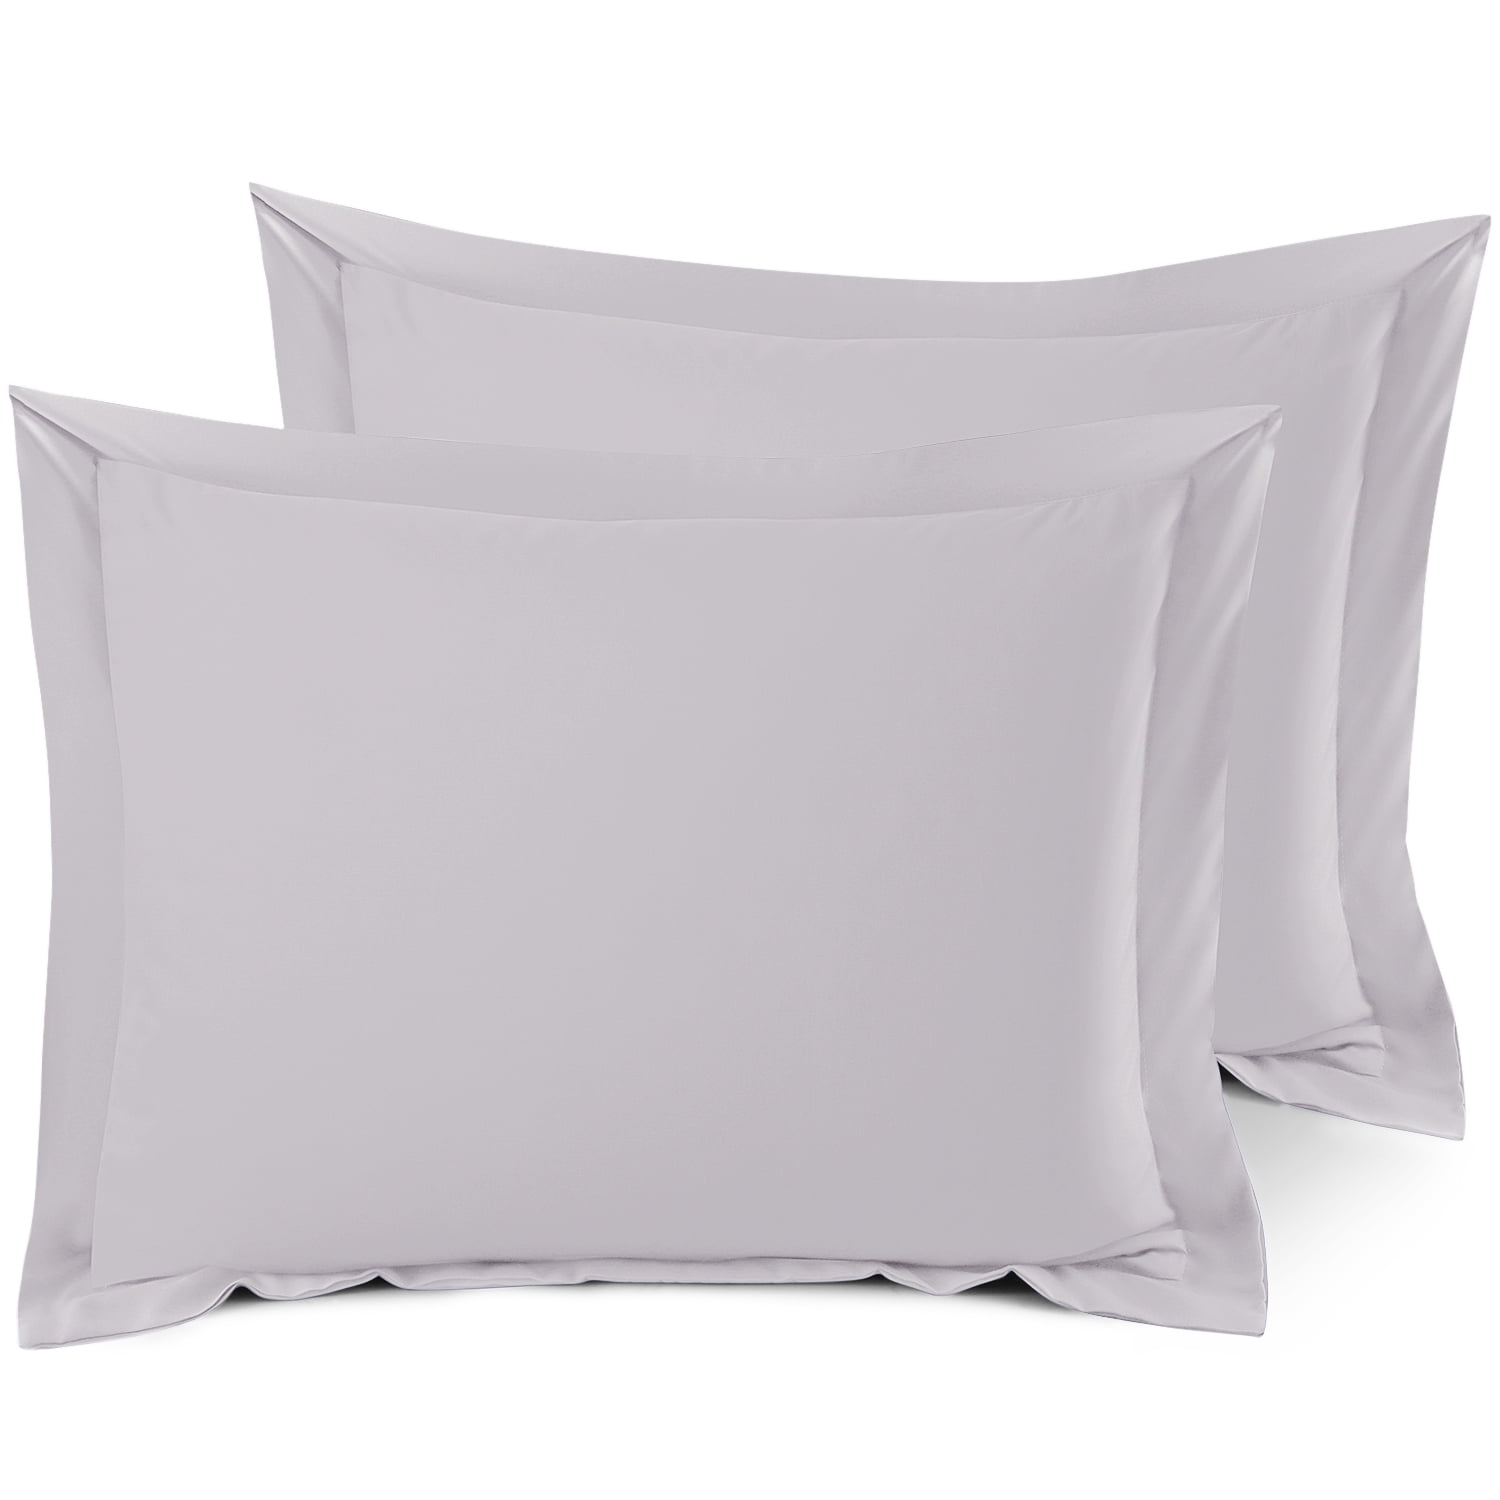 VICTORIA BEDDING Cotton 600-Thread-Count Set of 2 Pillowcases Soft and smooth Wrinkle Free SIZES Ivory Solid,Continental Square Size 65 X 65 Cm-Luxury Hotel Quality!! 